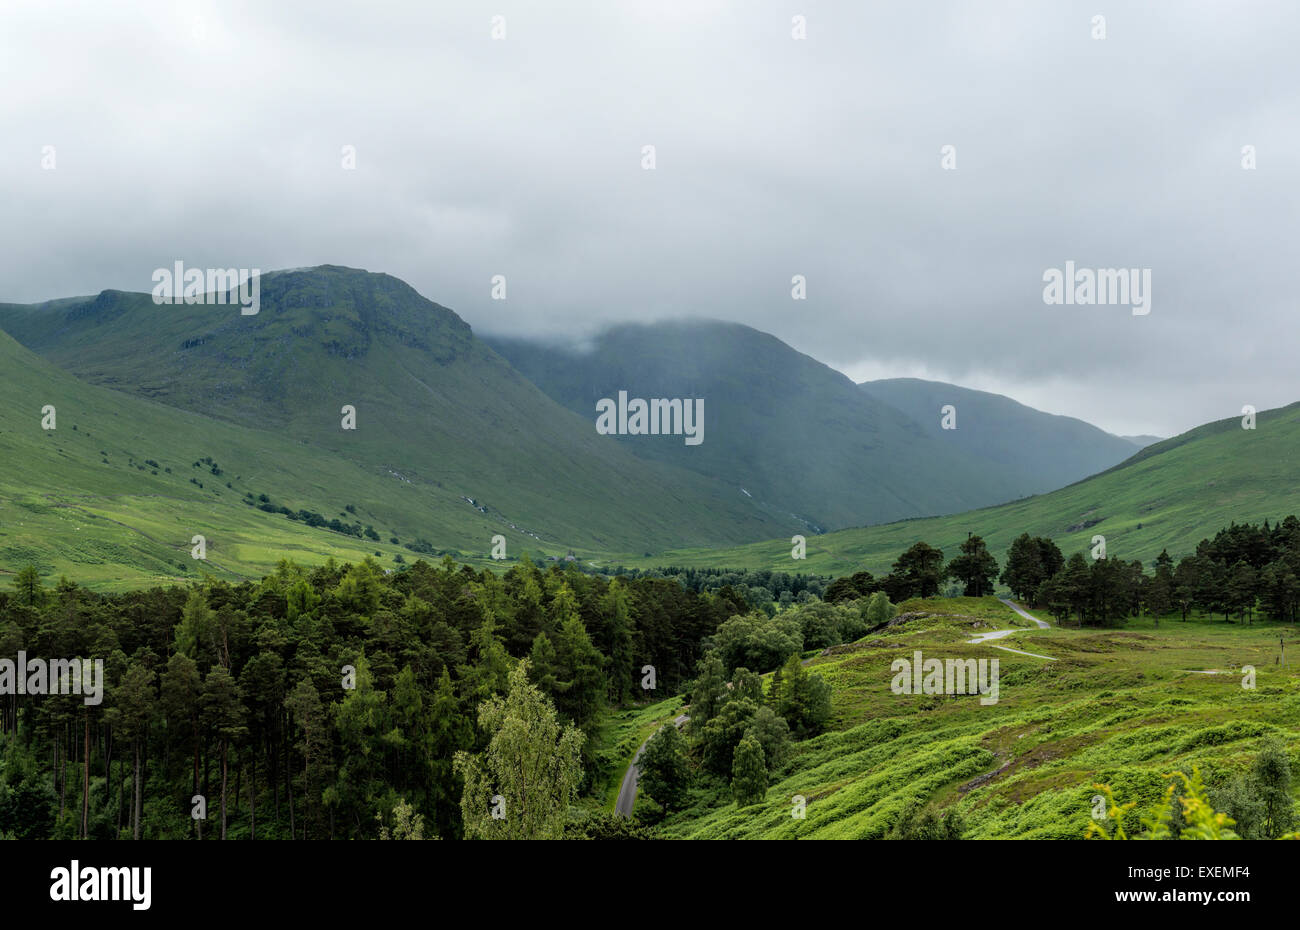 A View Of Glen Lyon With Showers, Highland Perthshire, Scotland. Stock Photo